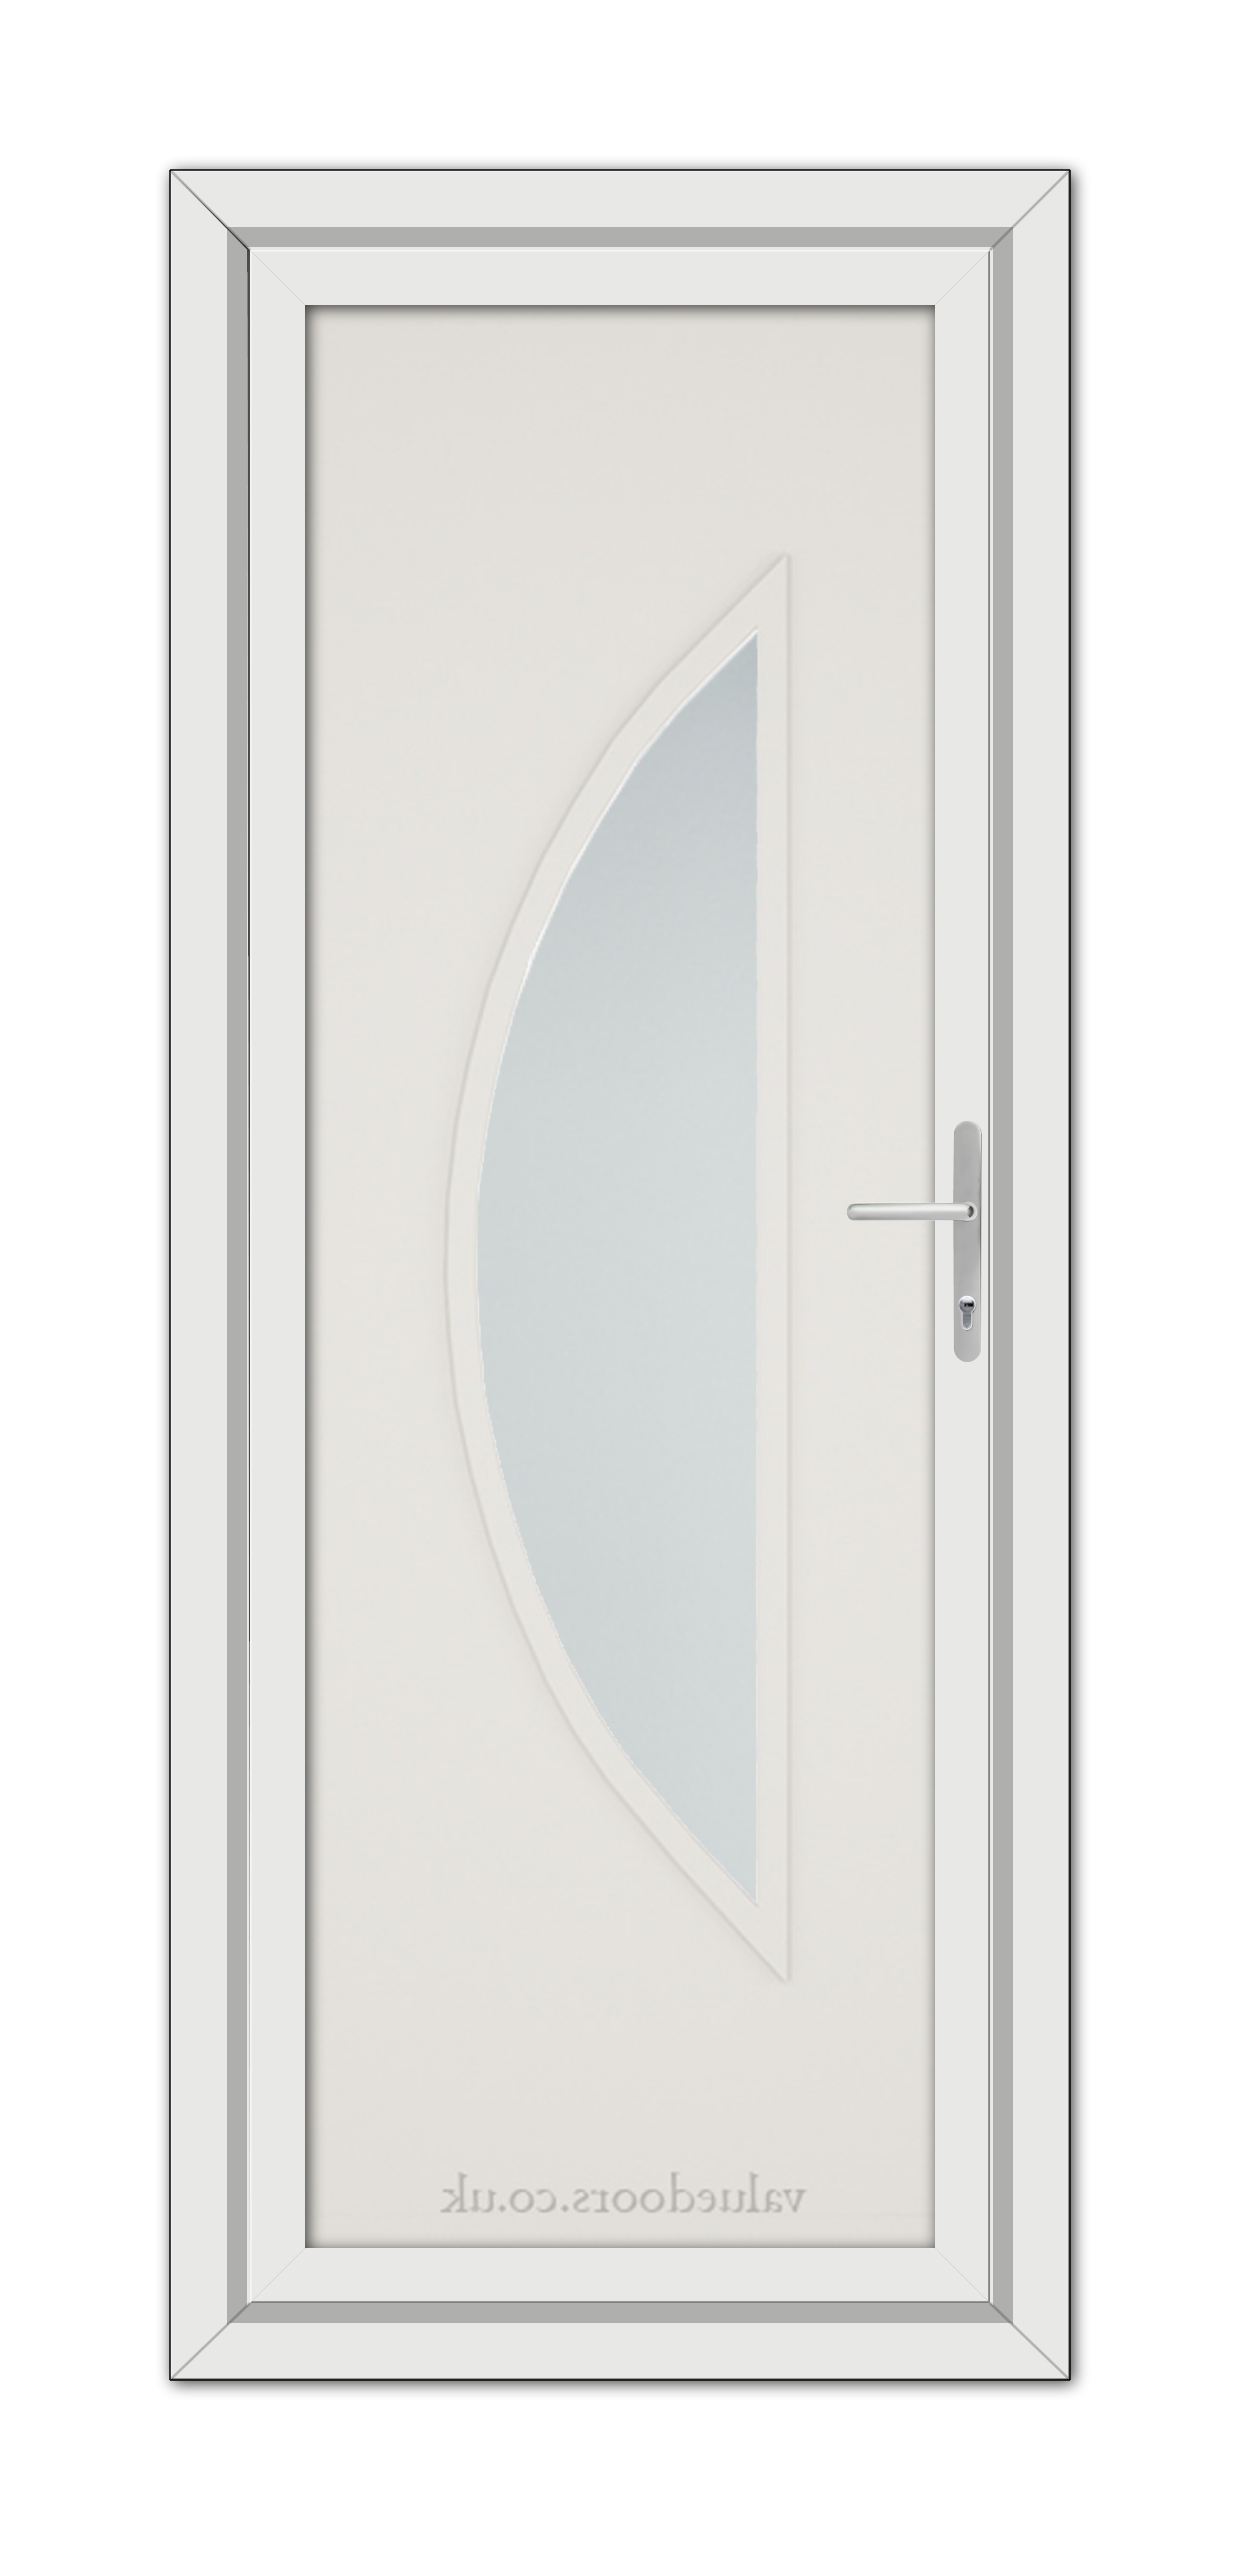 White Cream Modern 5051 uPVC Door with an elliptical frosted glass window and a modern handle, oriented vertically.